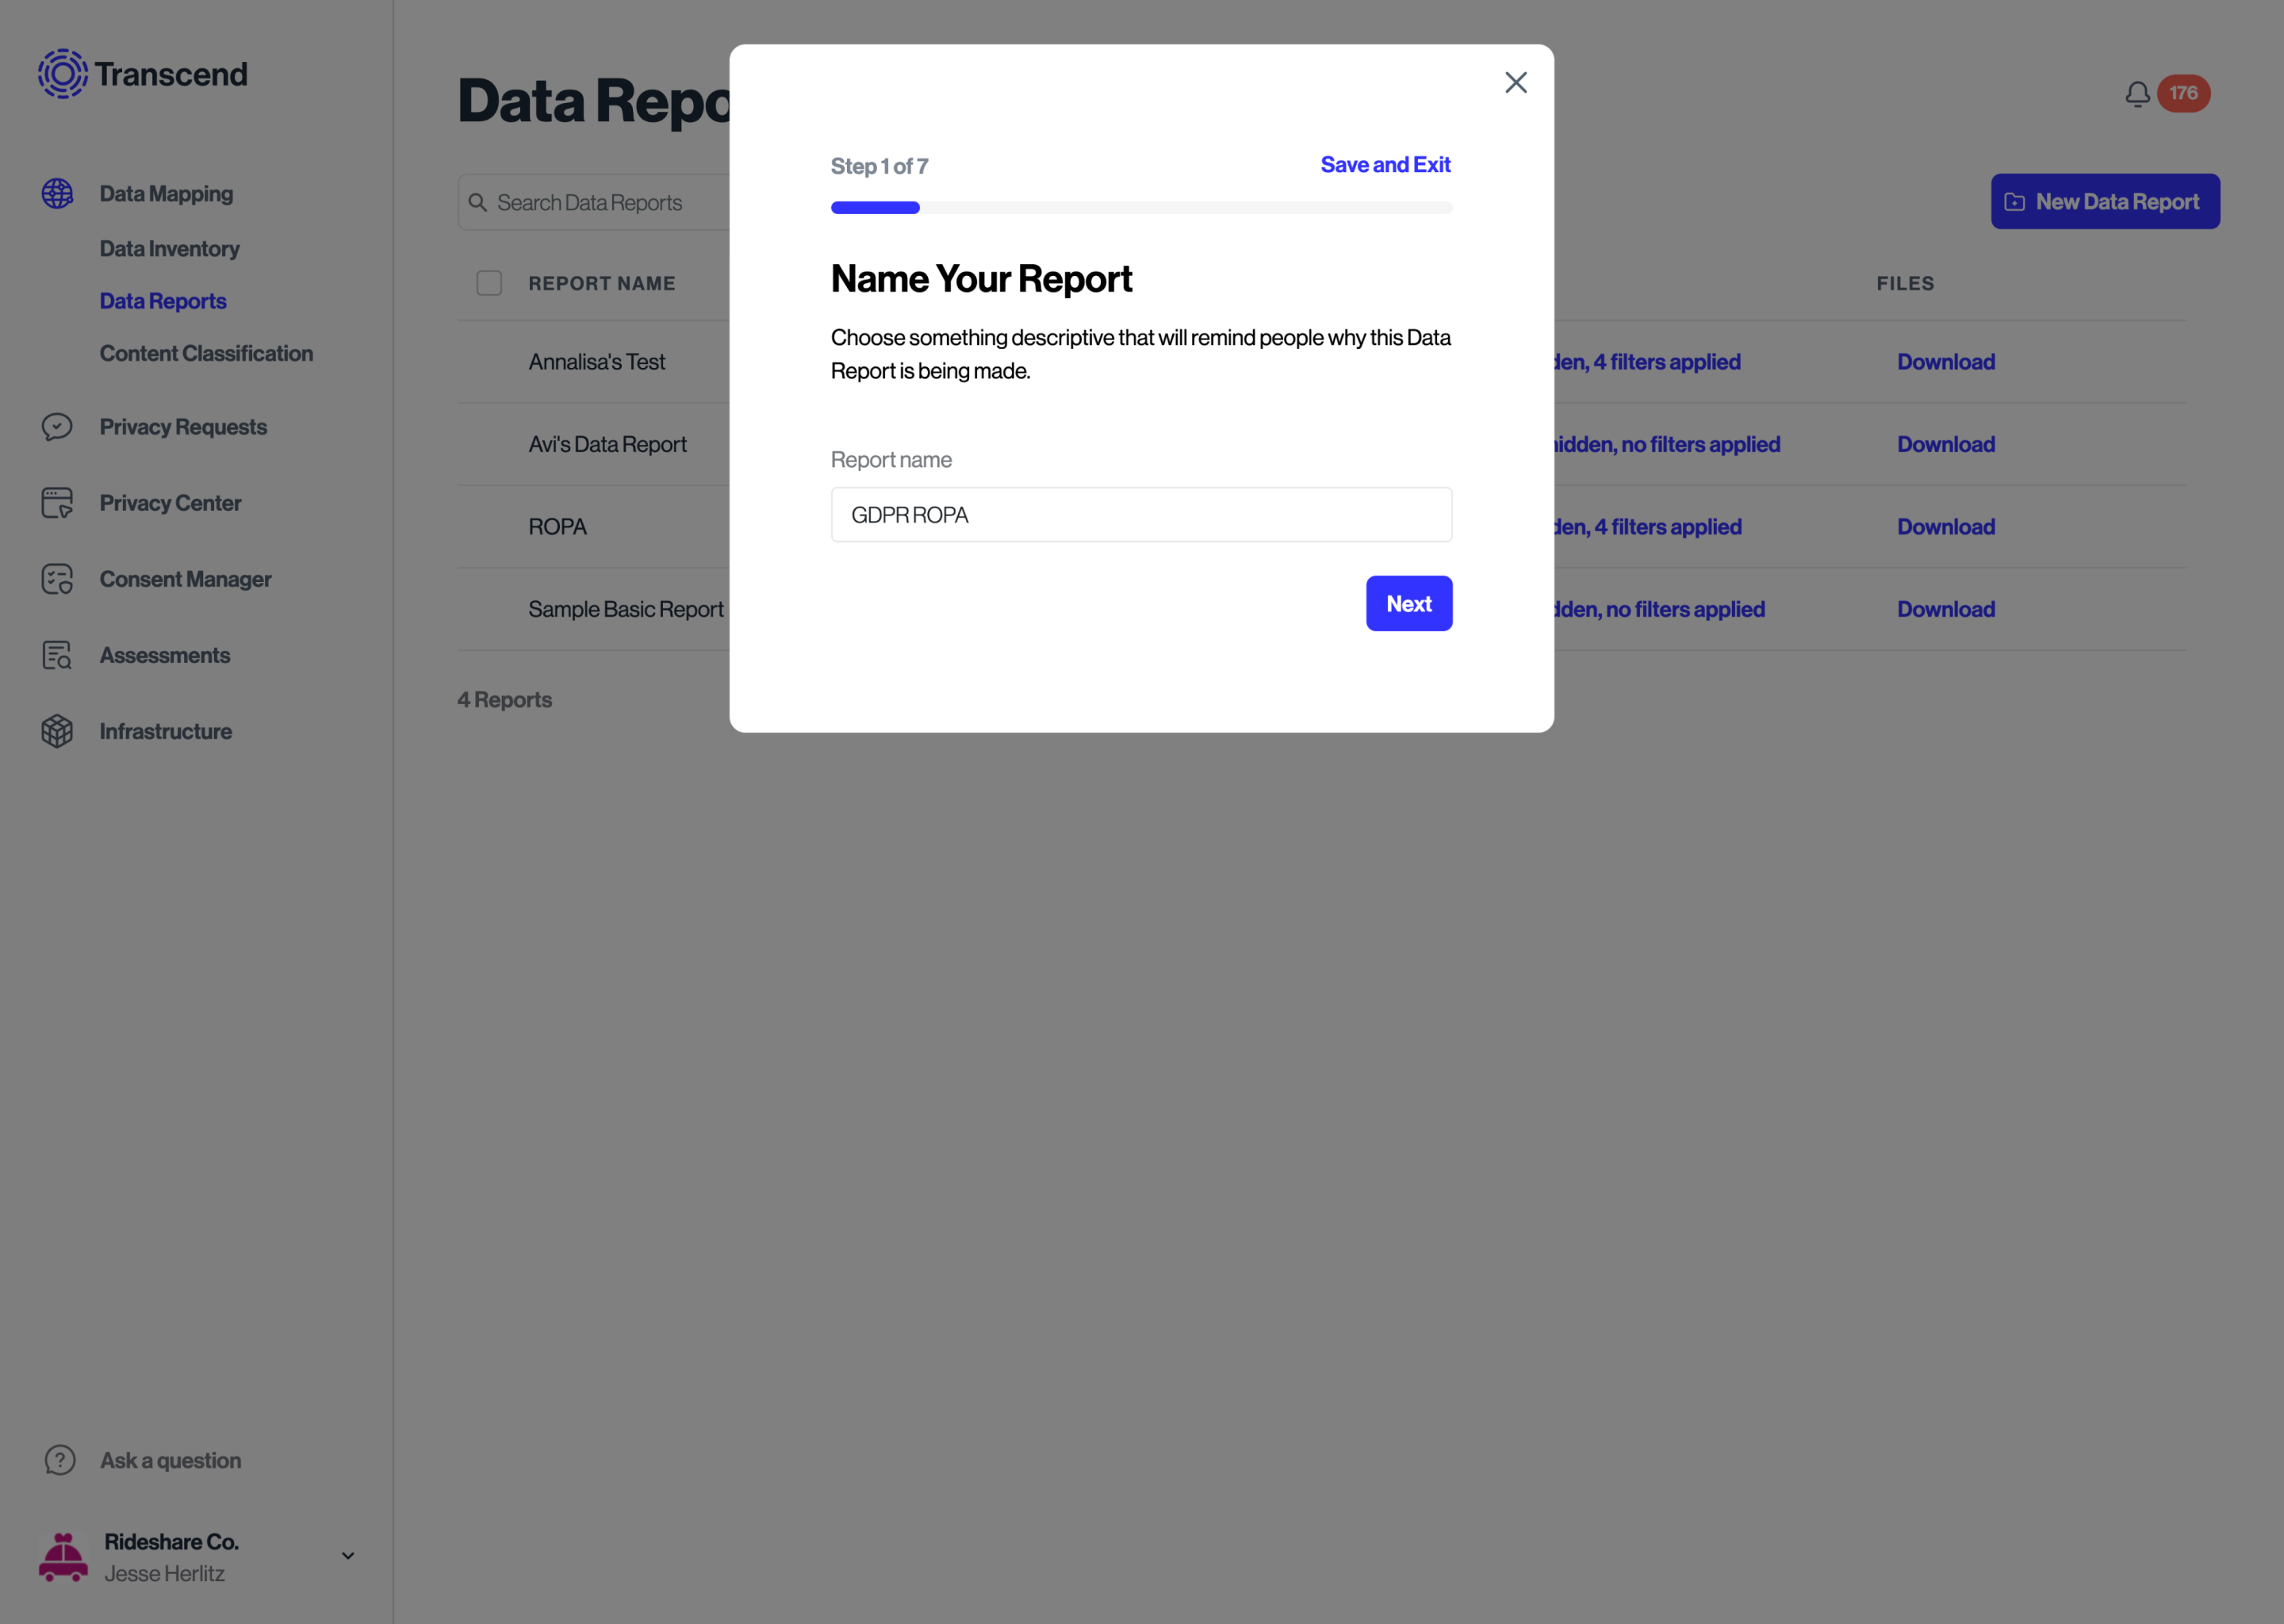 How to name your Data Report